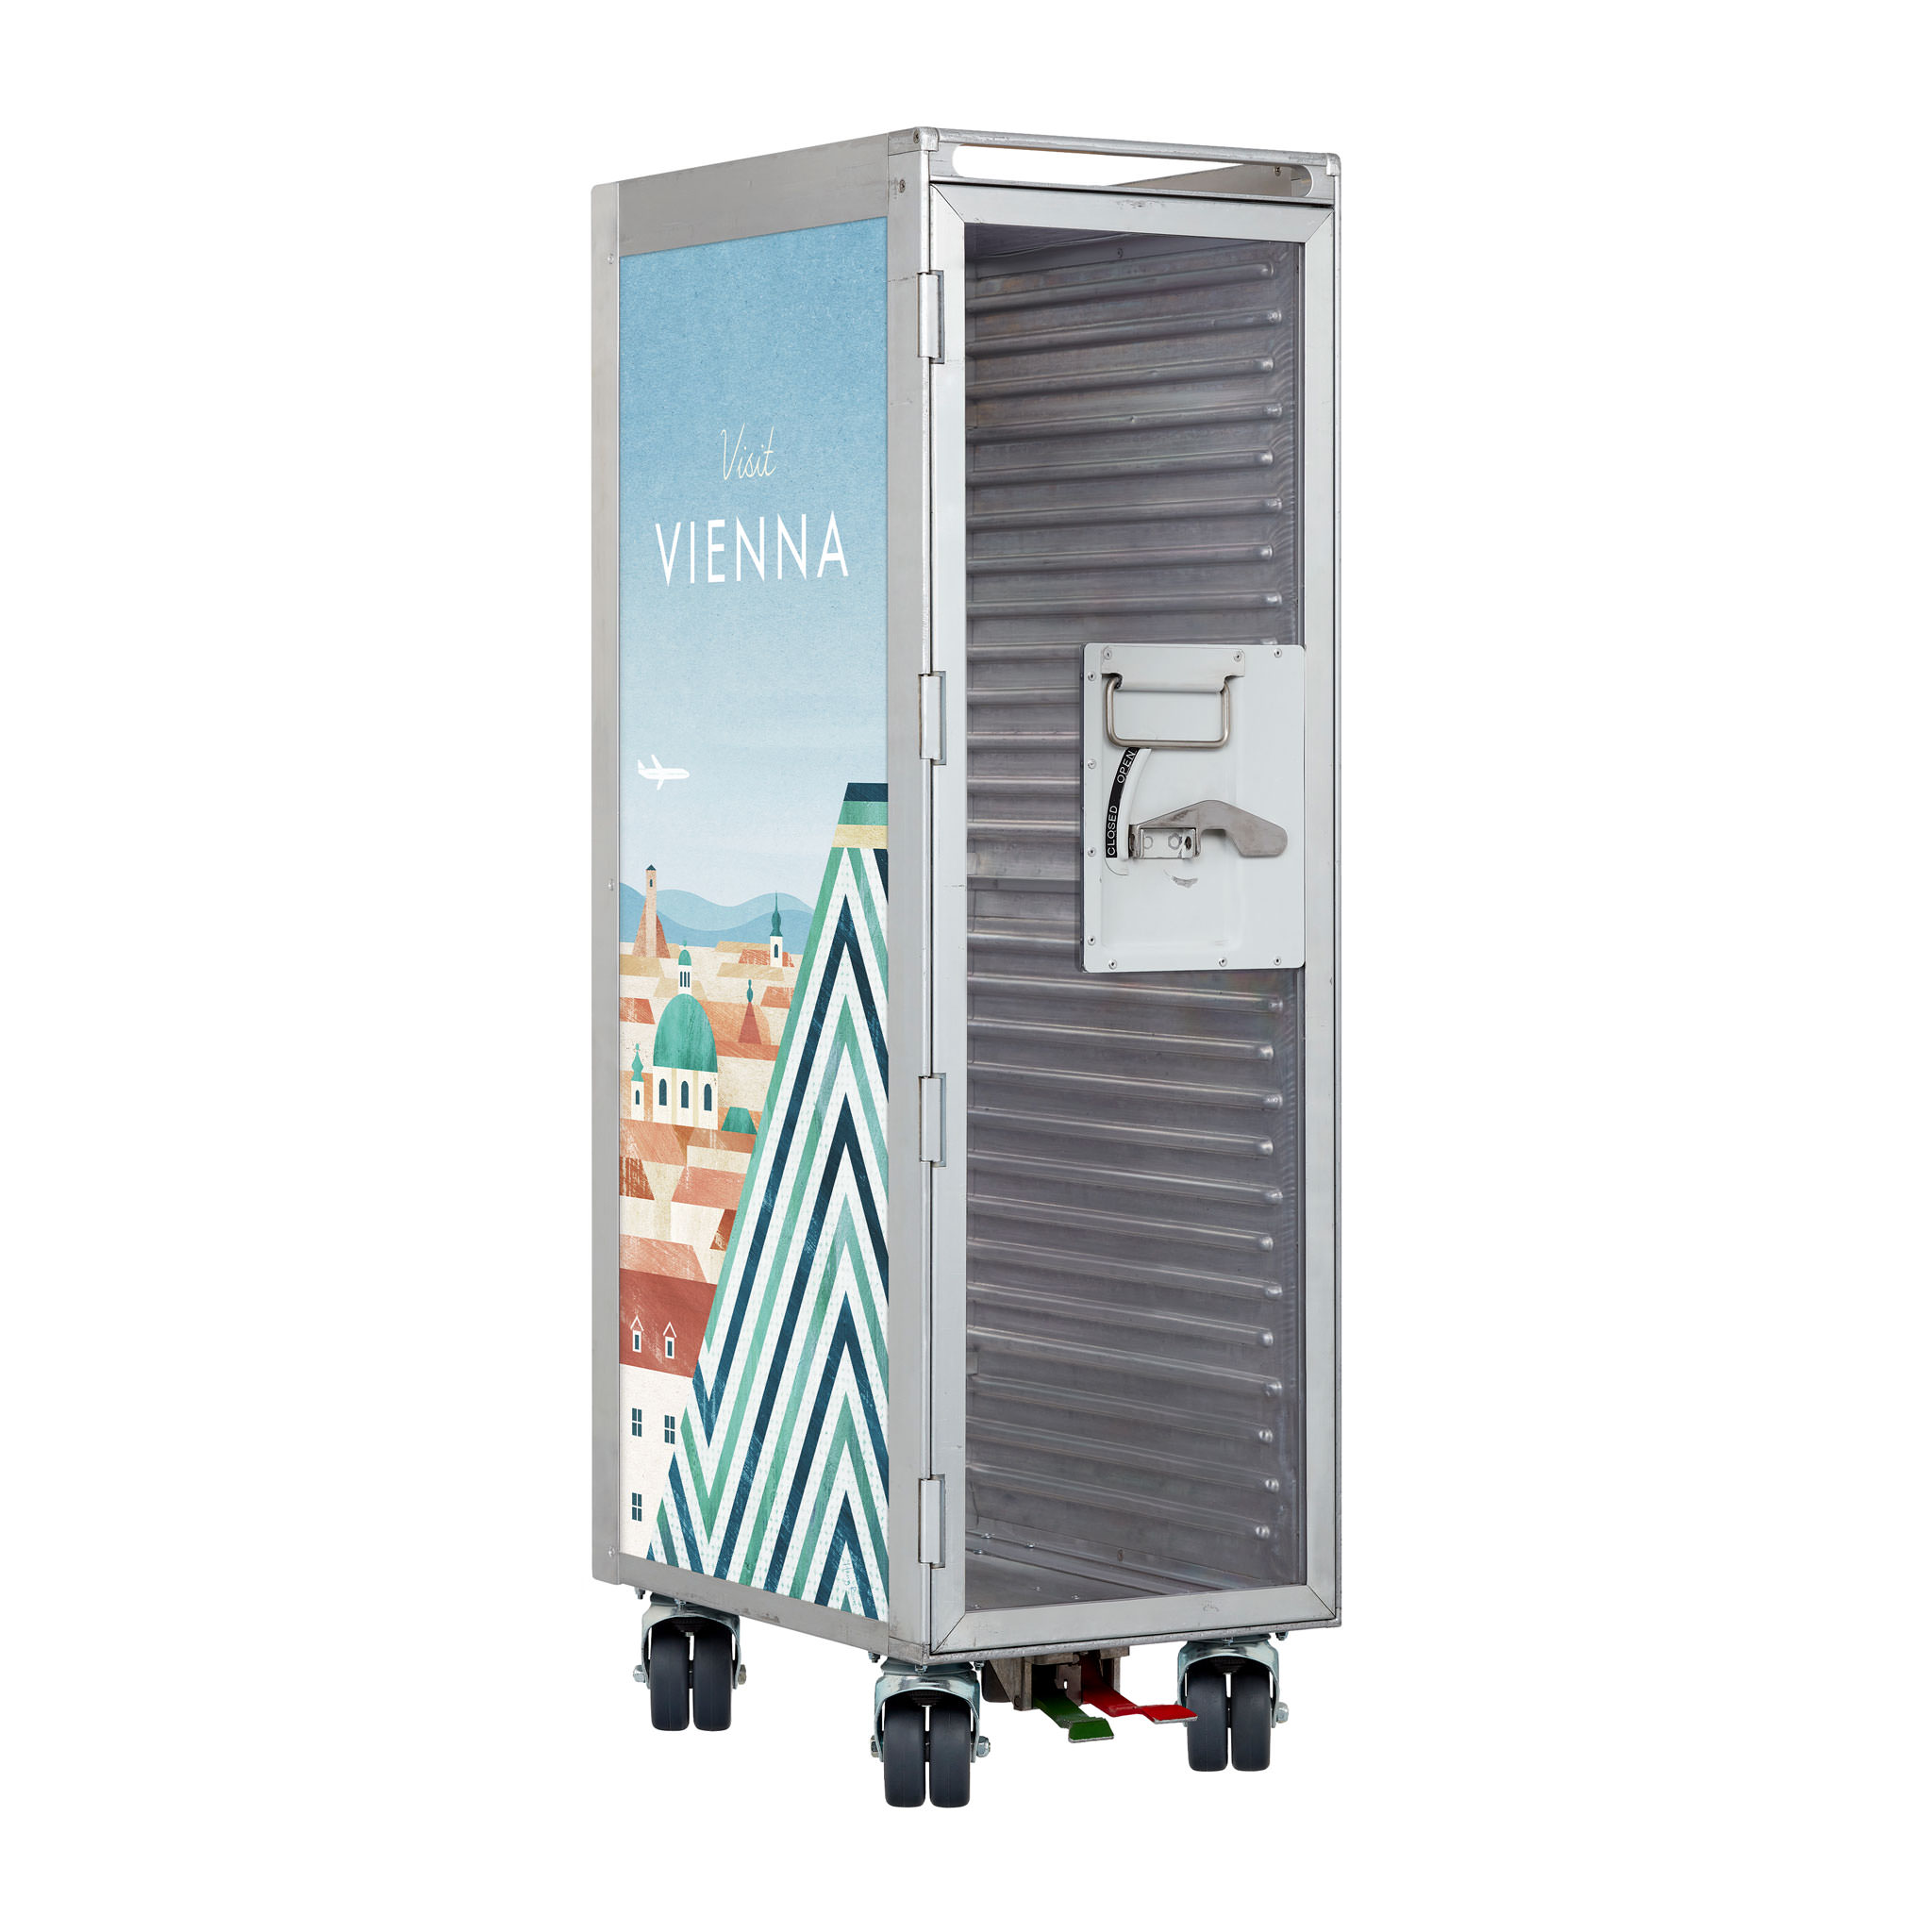 Airline Cart Henry Rivers Edition Refurbished Visit Vienna with Glass Door and new Castors